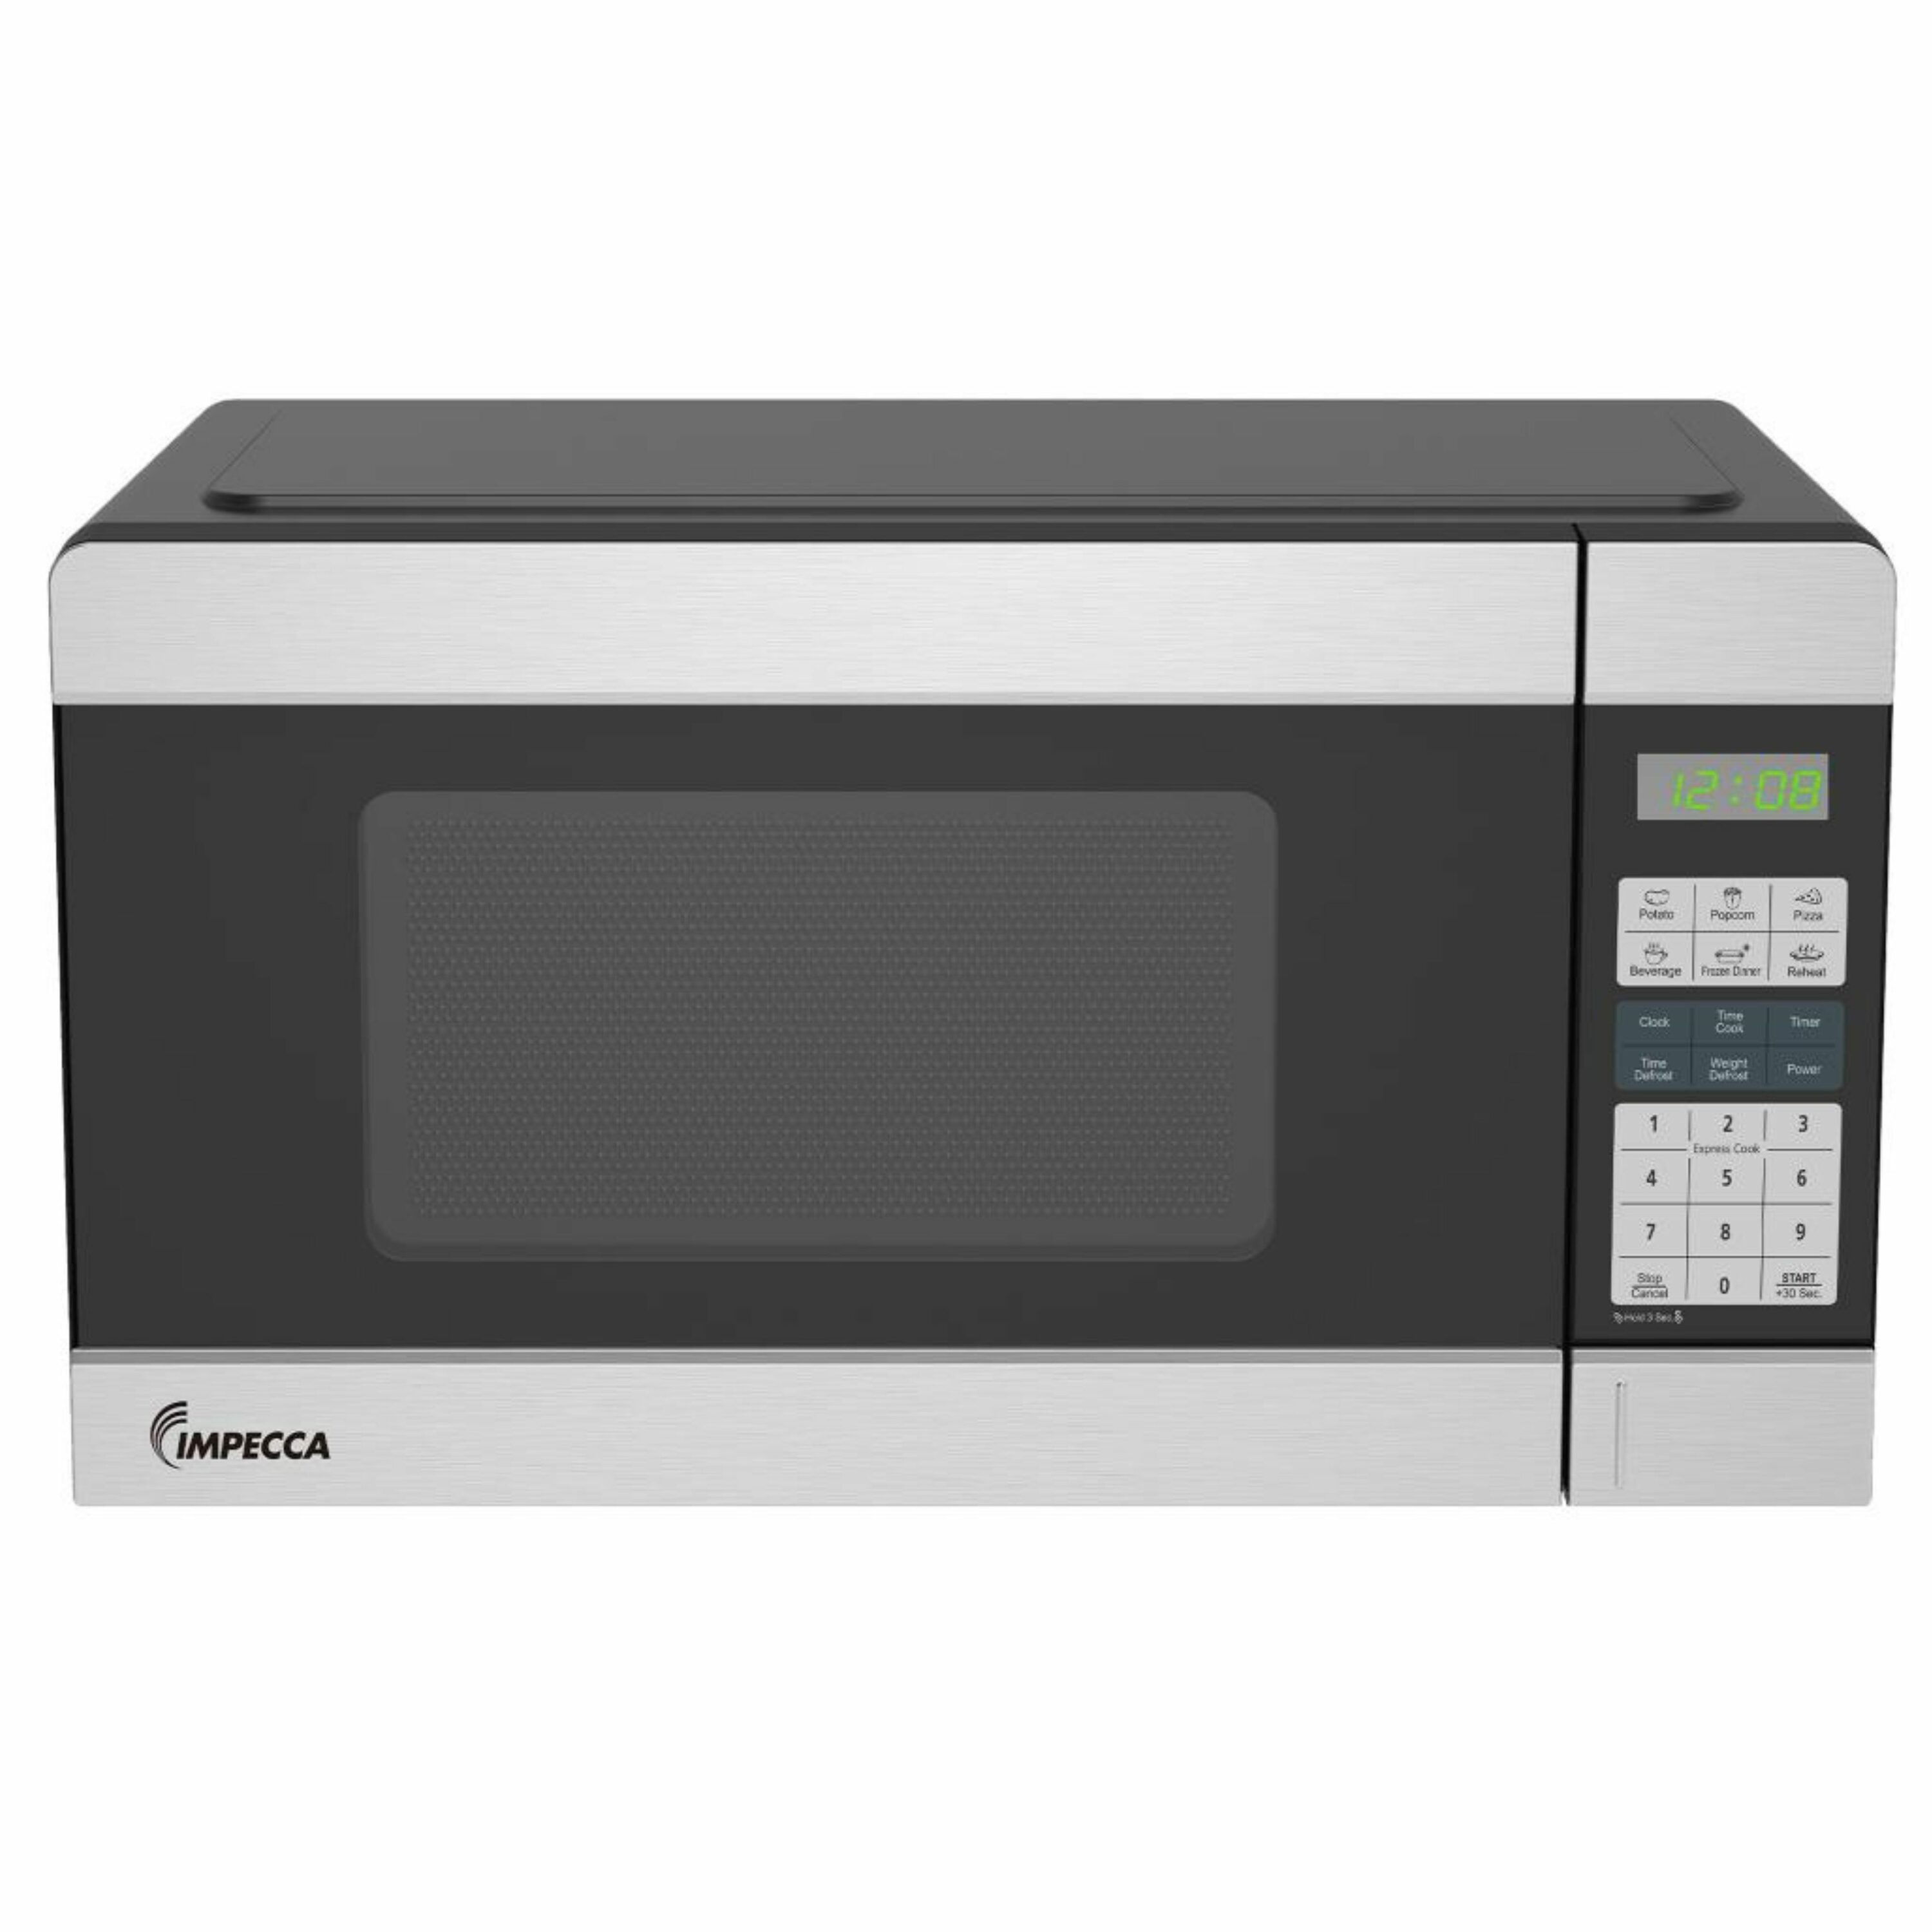 Toshiba 1.1 Cu. Ft. Countertop Microwave Stainless Steel - Office